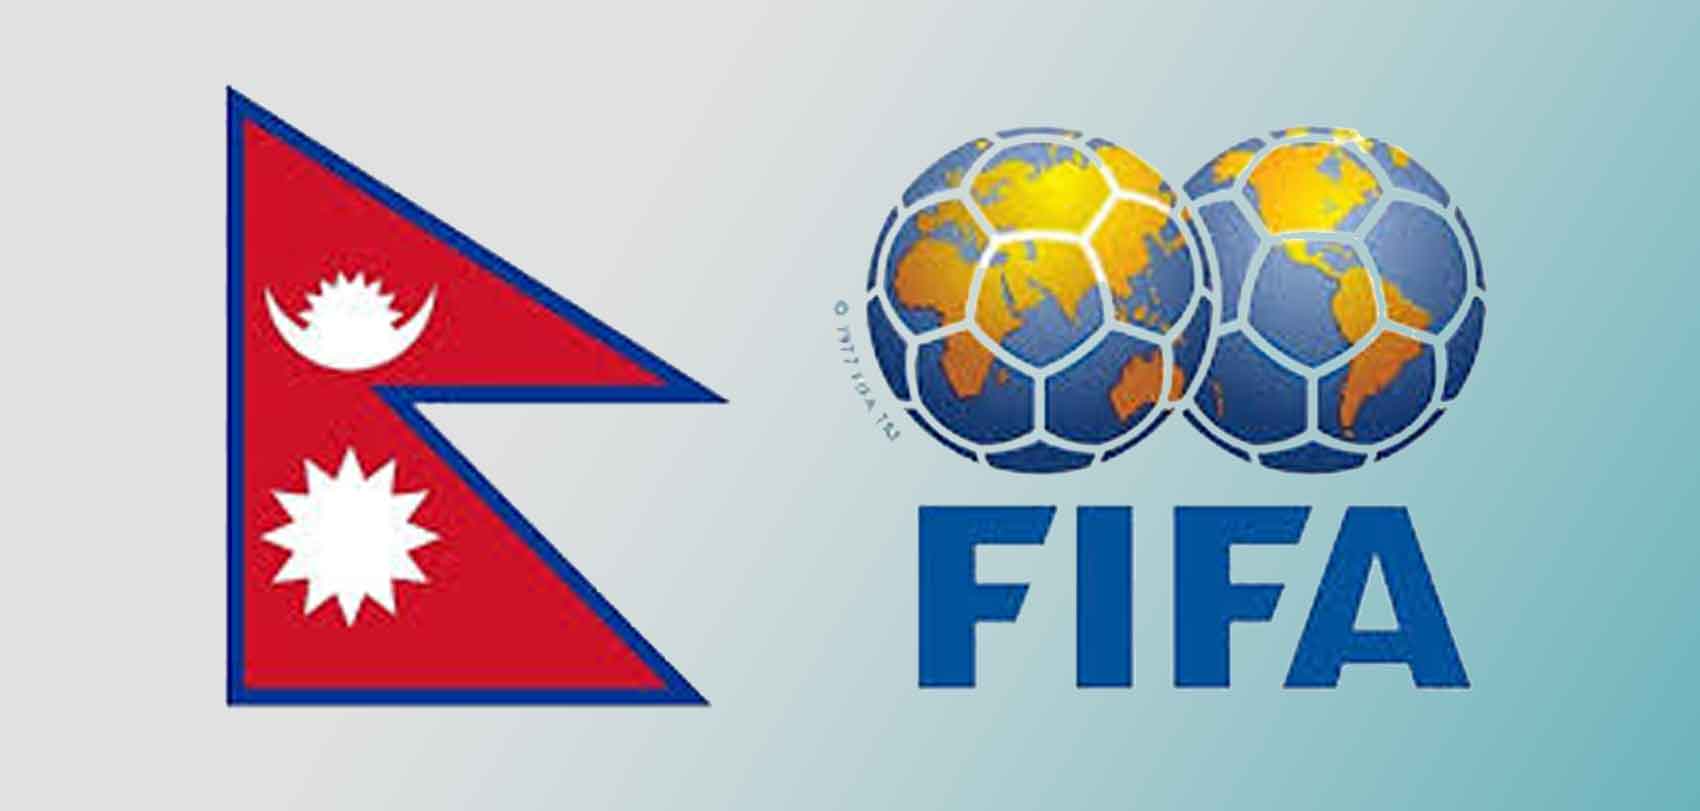 Nepal continues 161st position in FIFA ranking